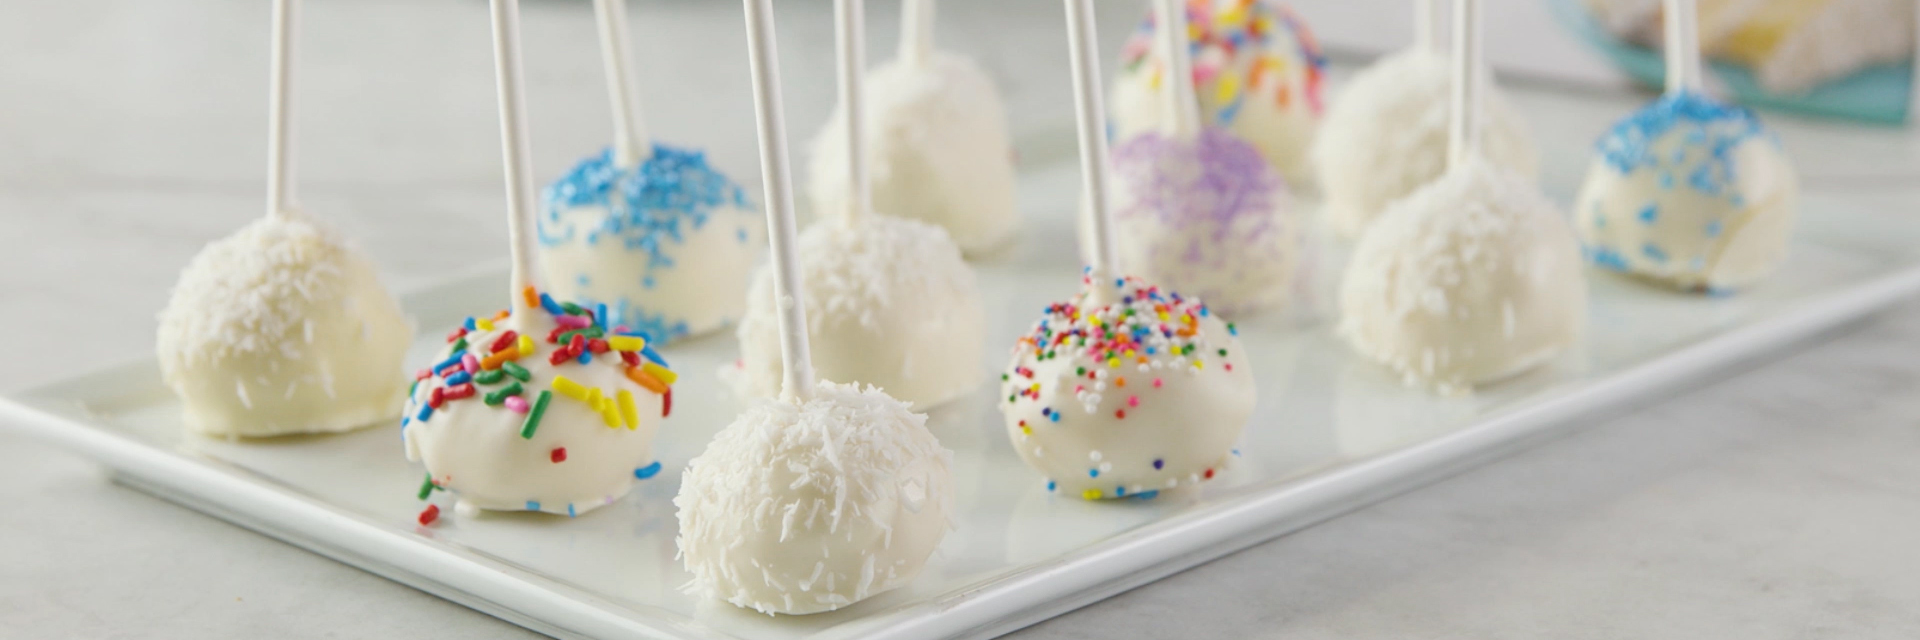 No Bake Cake Pops made with Pepperidge Farm Frozen Layer Cake